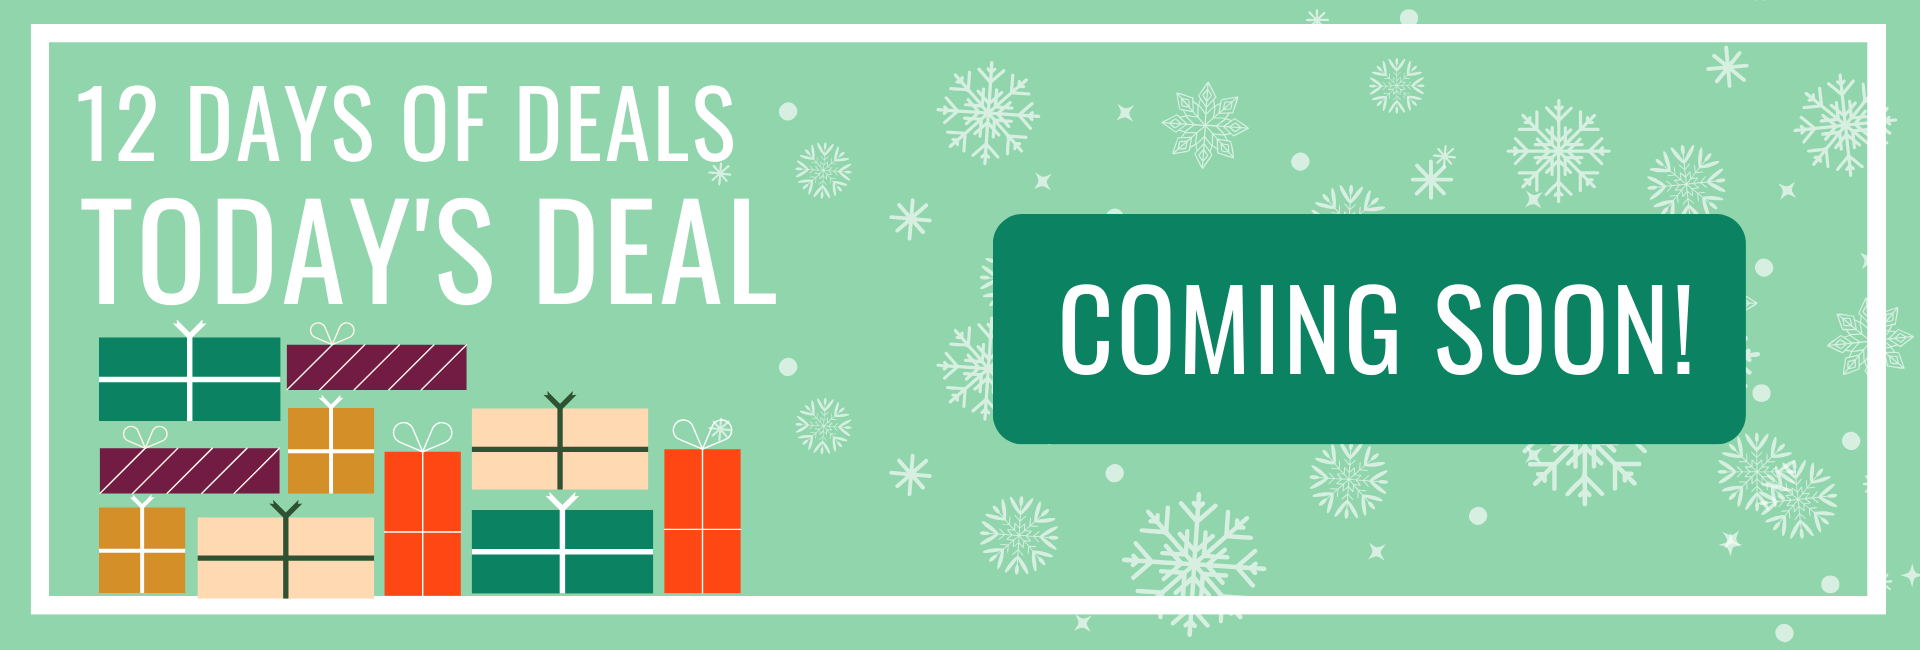  12 days of deals Coming Soon!